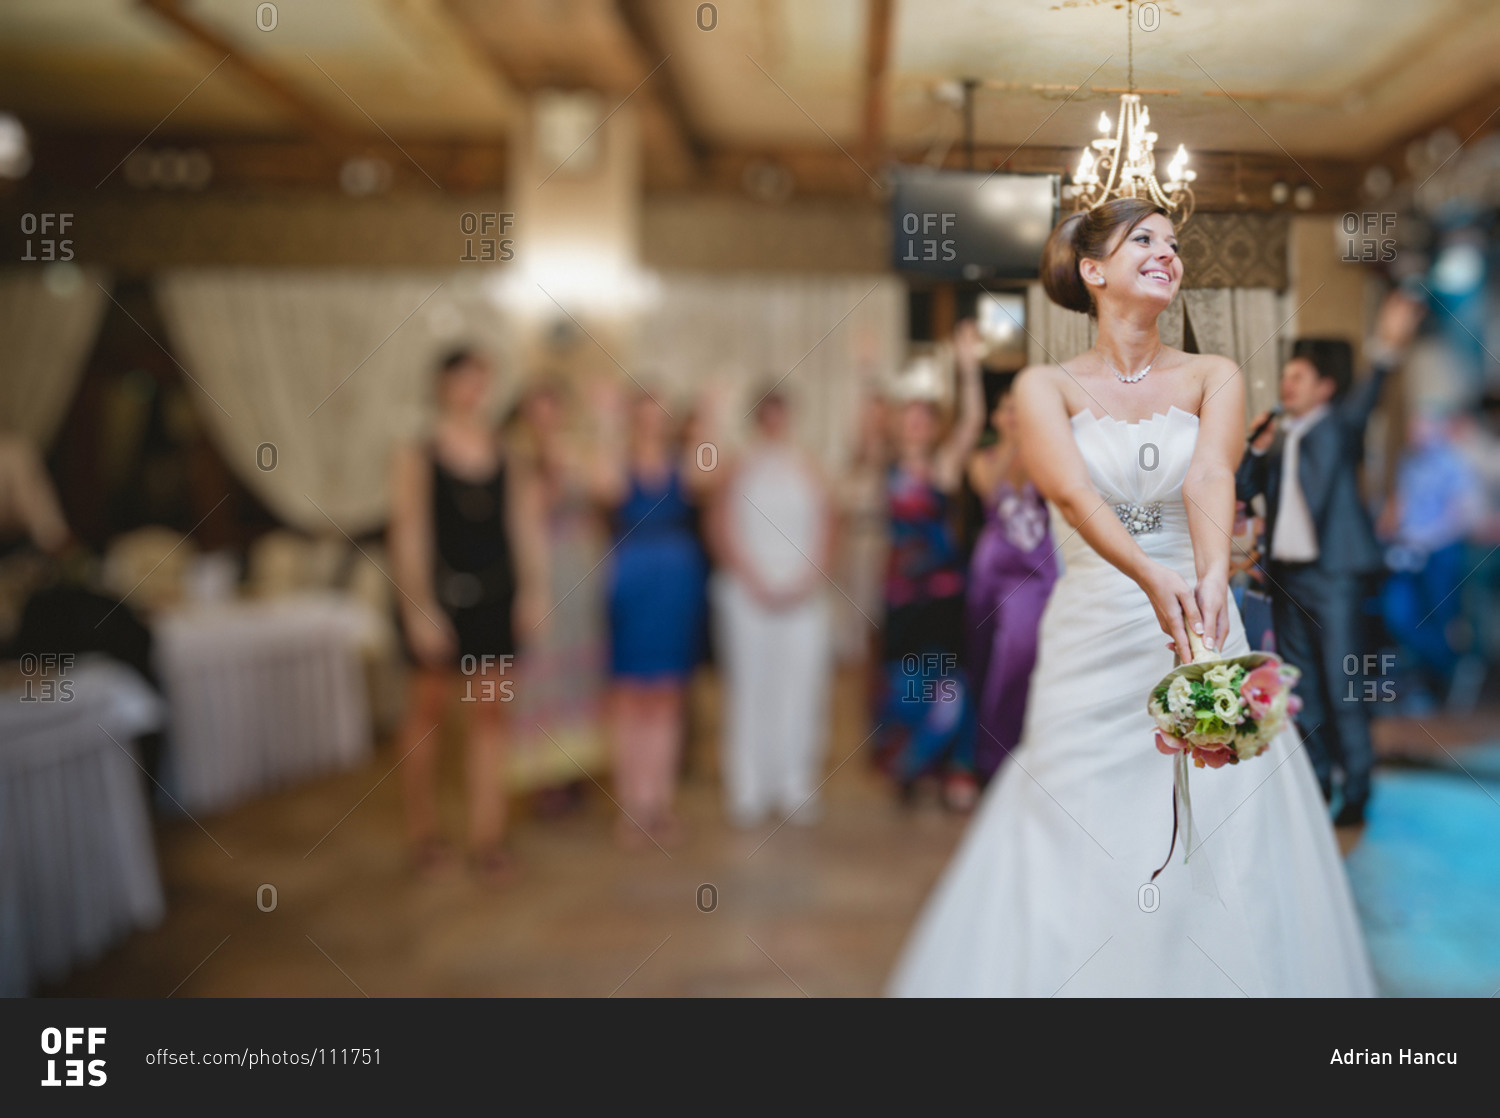 Bride throwing the bridal bouquet